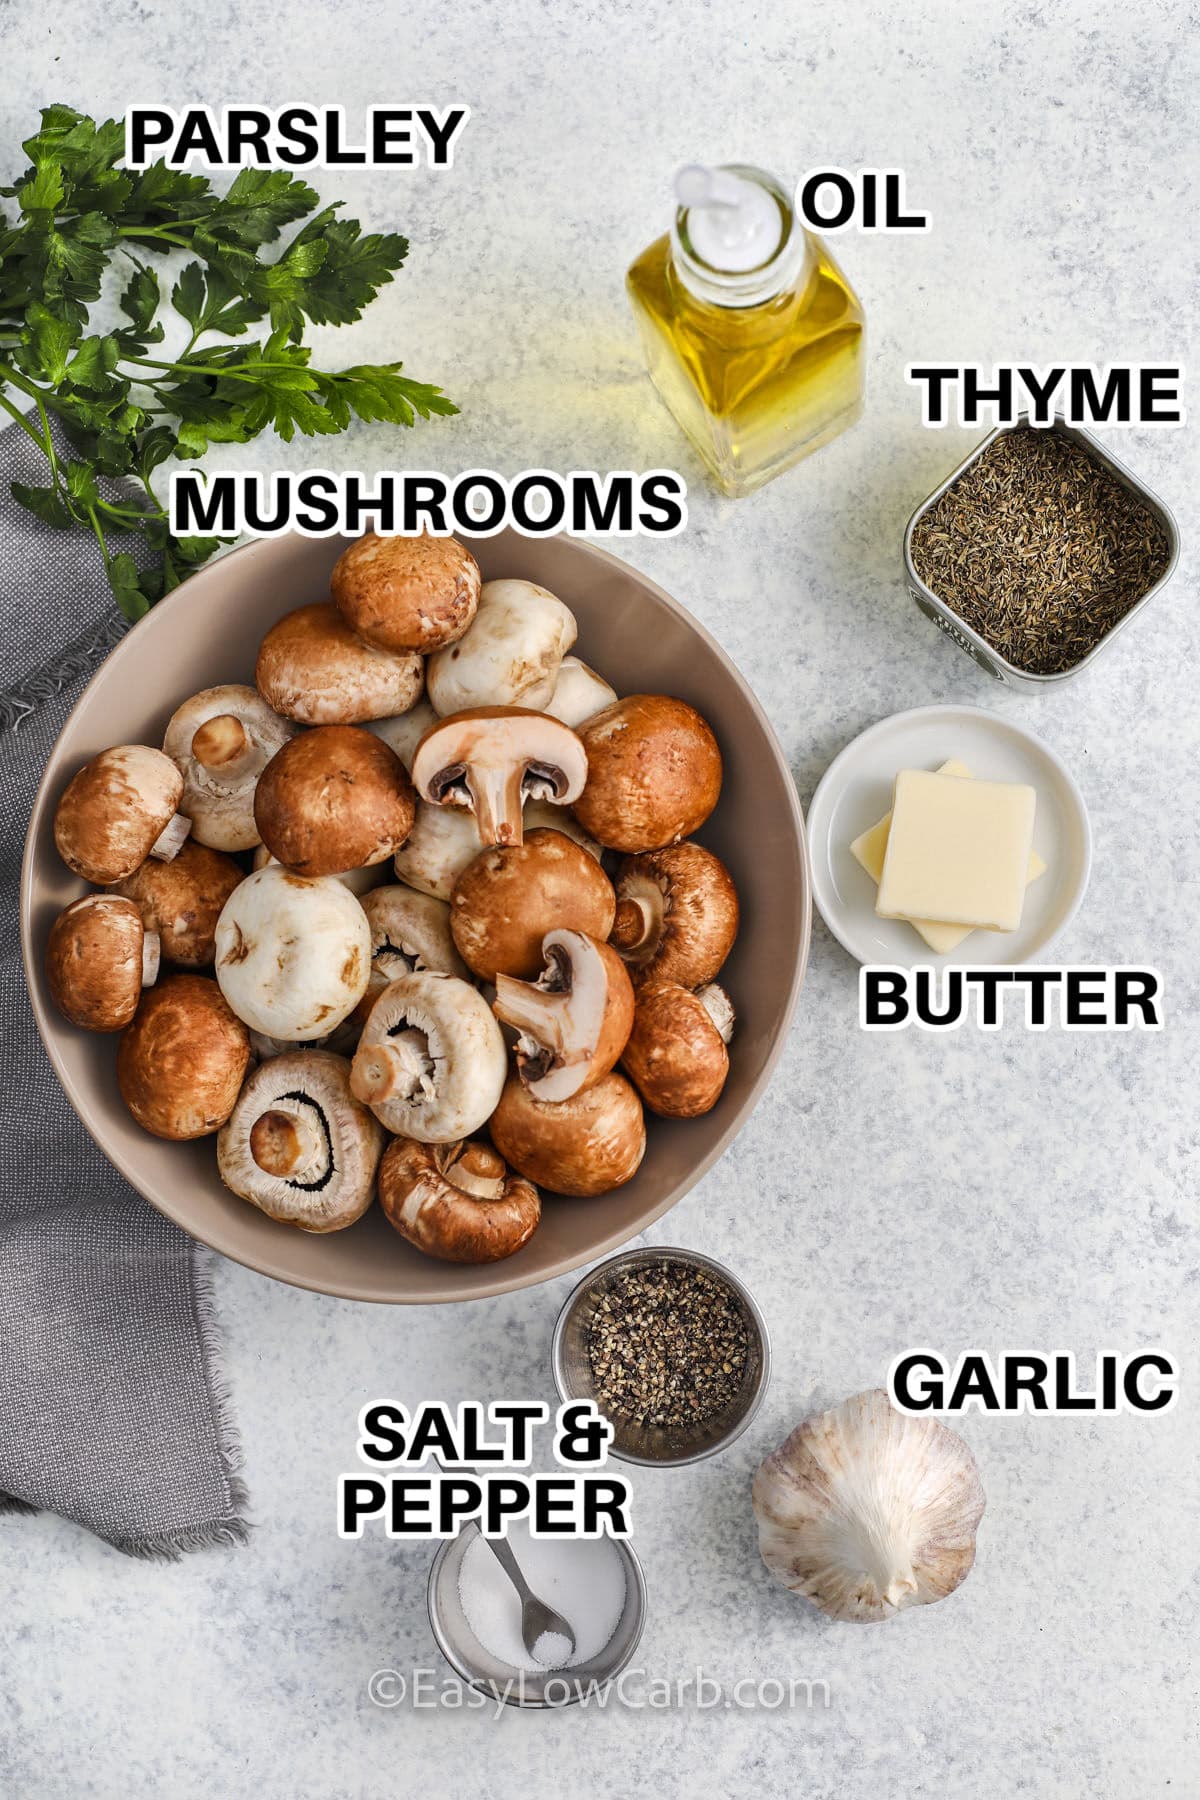 parsley oil thyme mushrooms butter garlic salt and pepper with labels to make Garlic Butter Mushrooms